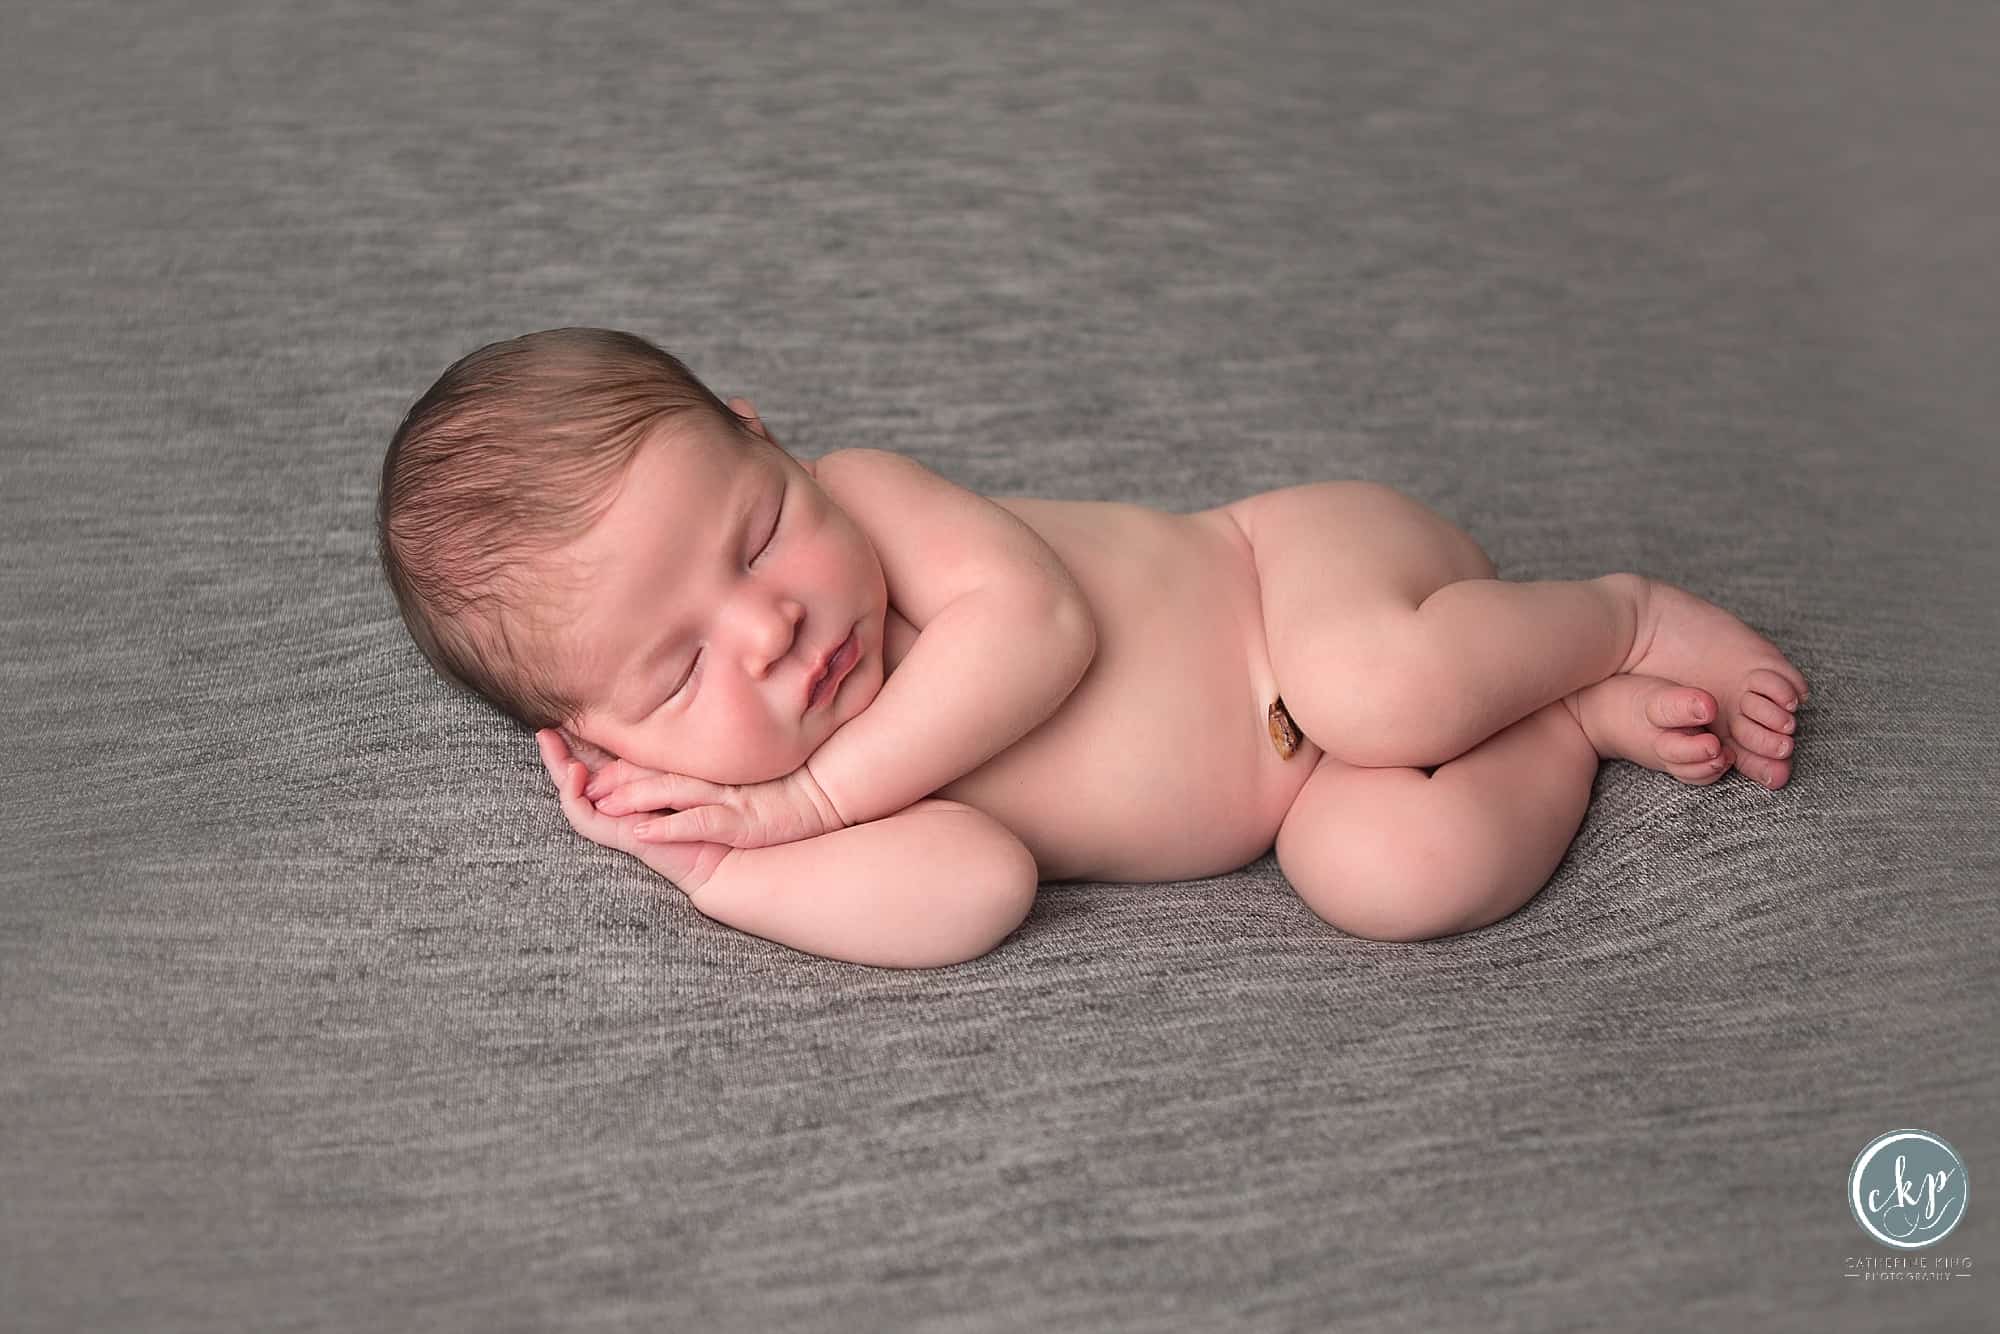 CT Newborn Photographer in Madison CT Photography Studio with a newborn baby girl and a puppy